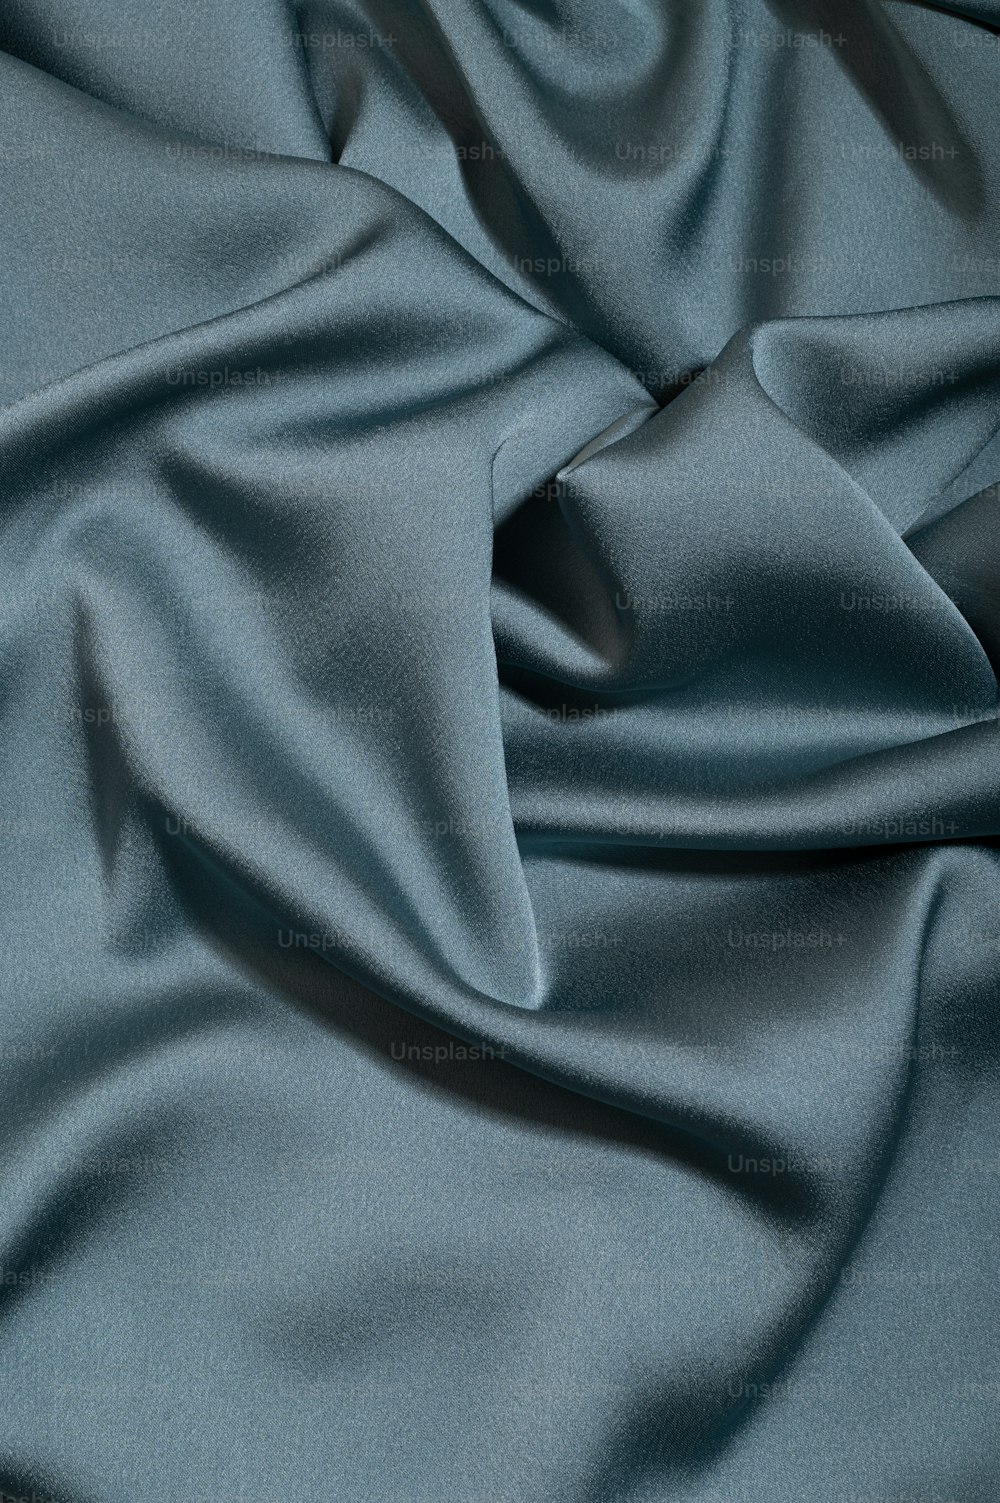 a close up view of a blue fabric